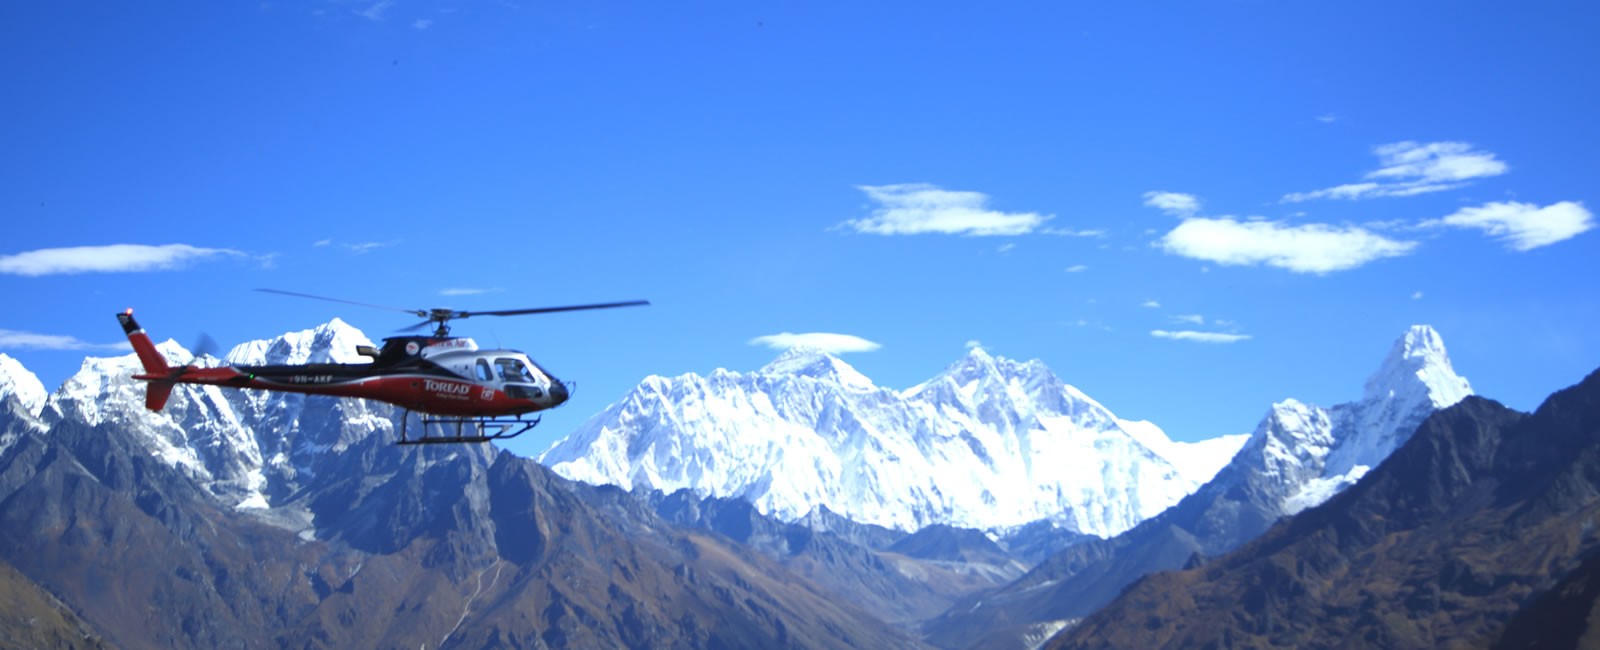 Everest Base Camp Trek and fly back by Helicopter